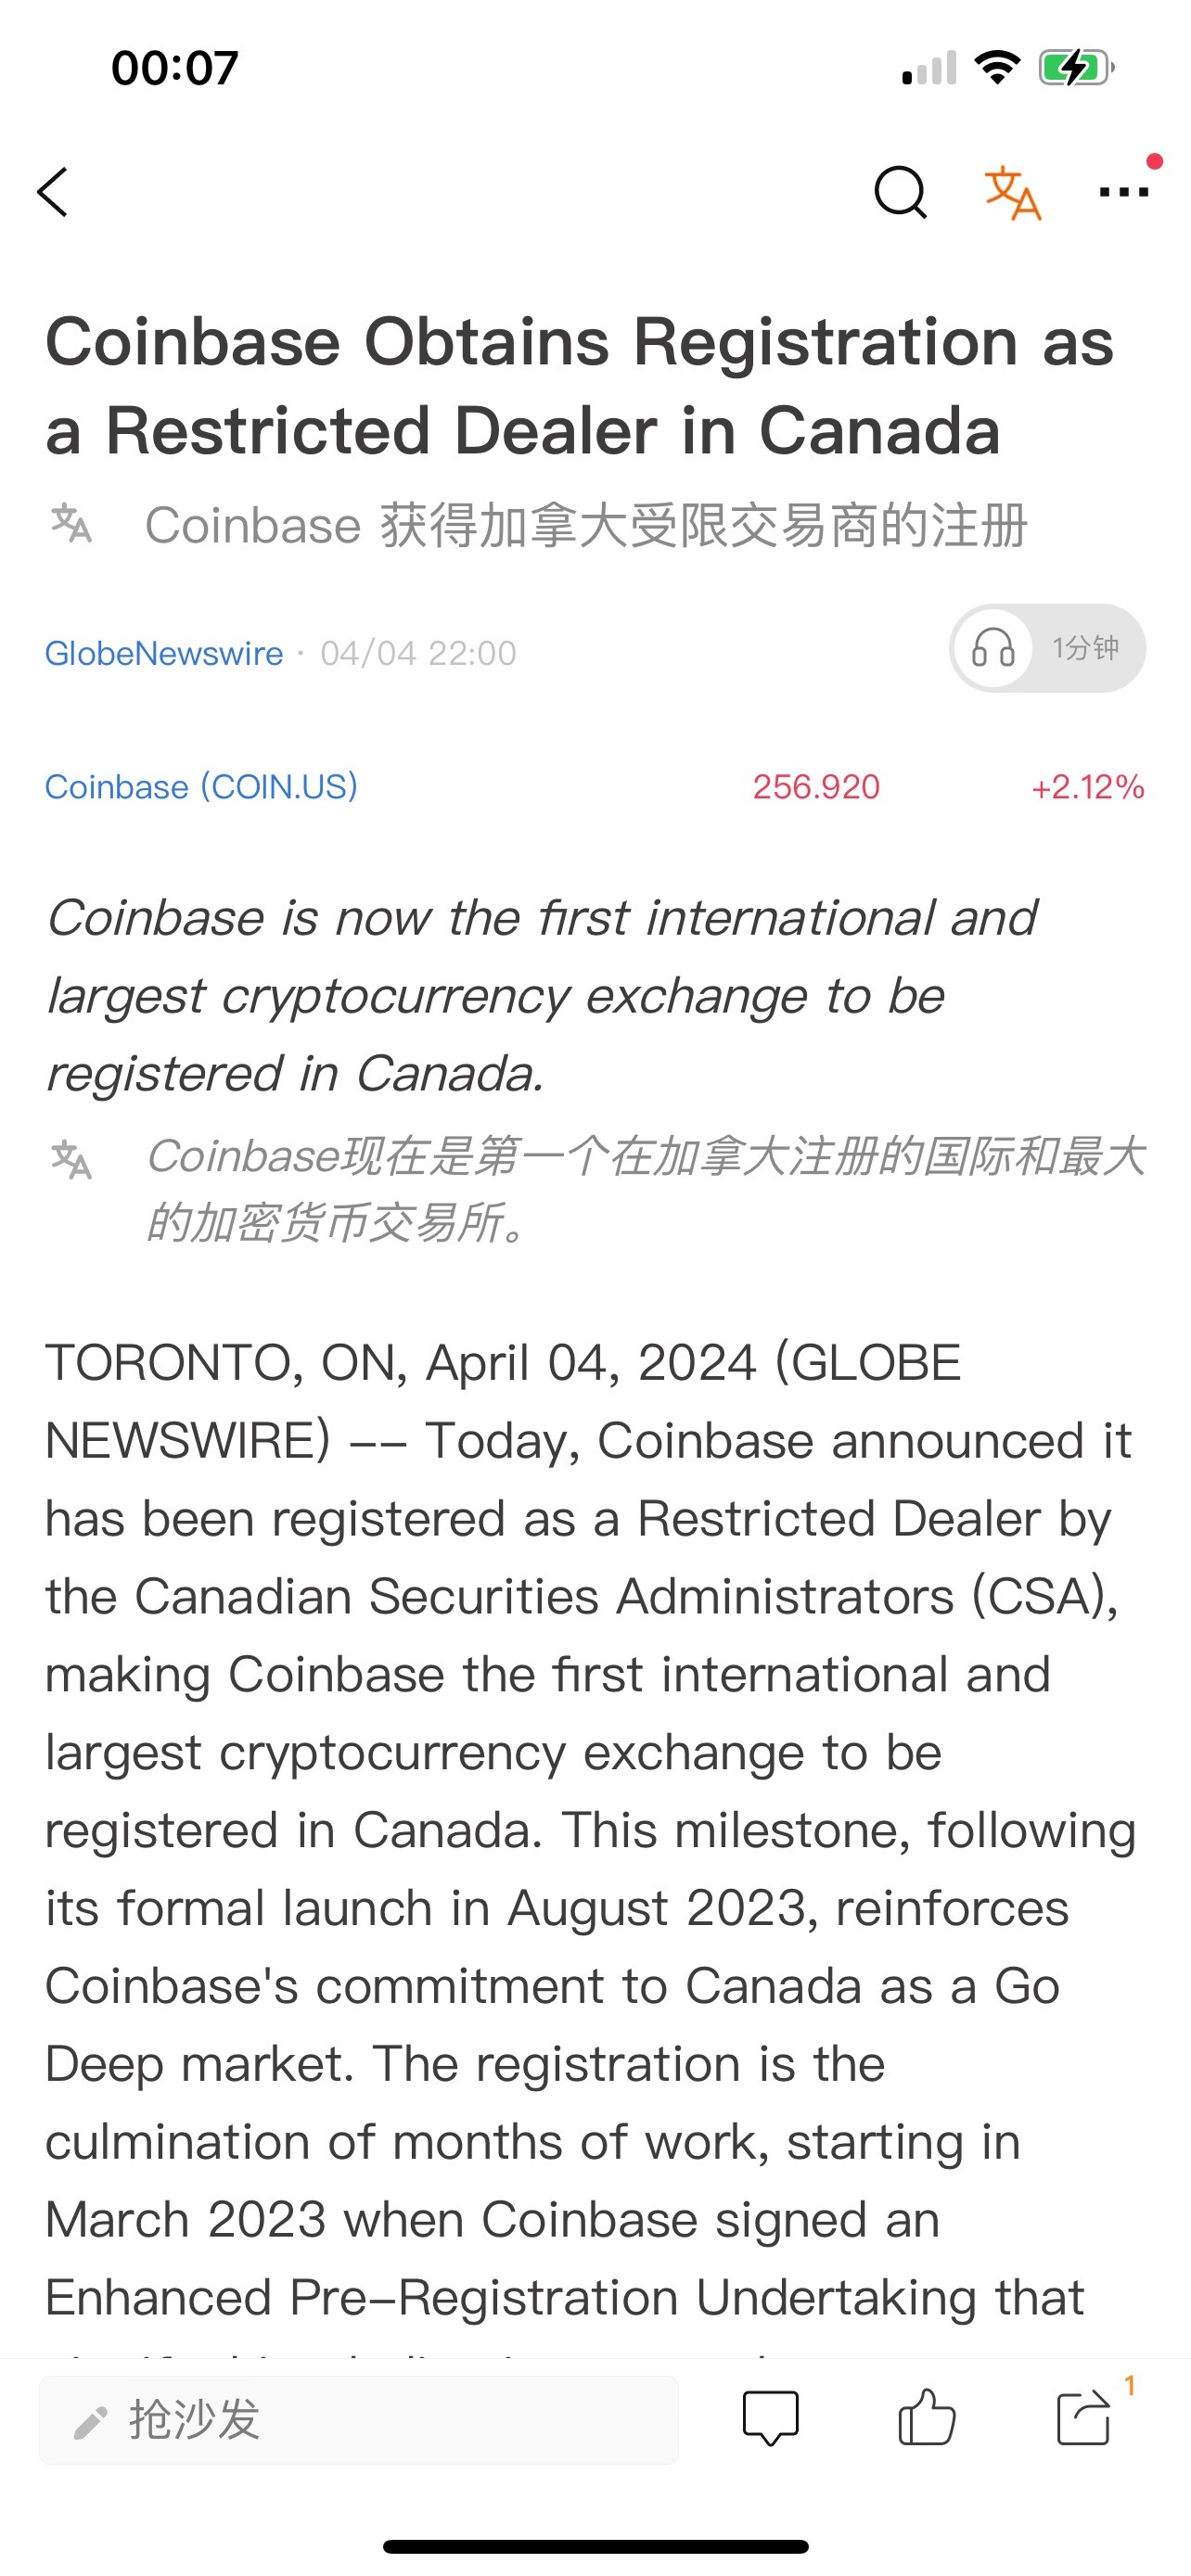 $Coinbase (COIN.US)$ Great news! I want it 🚀[Cool Guy]